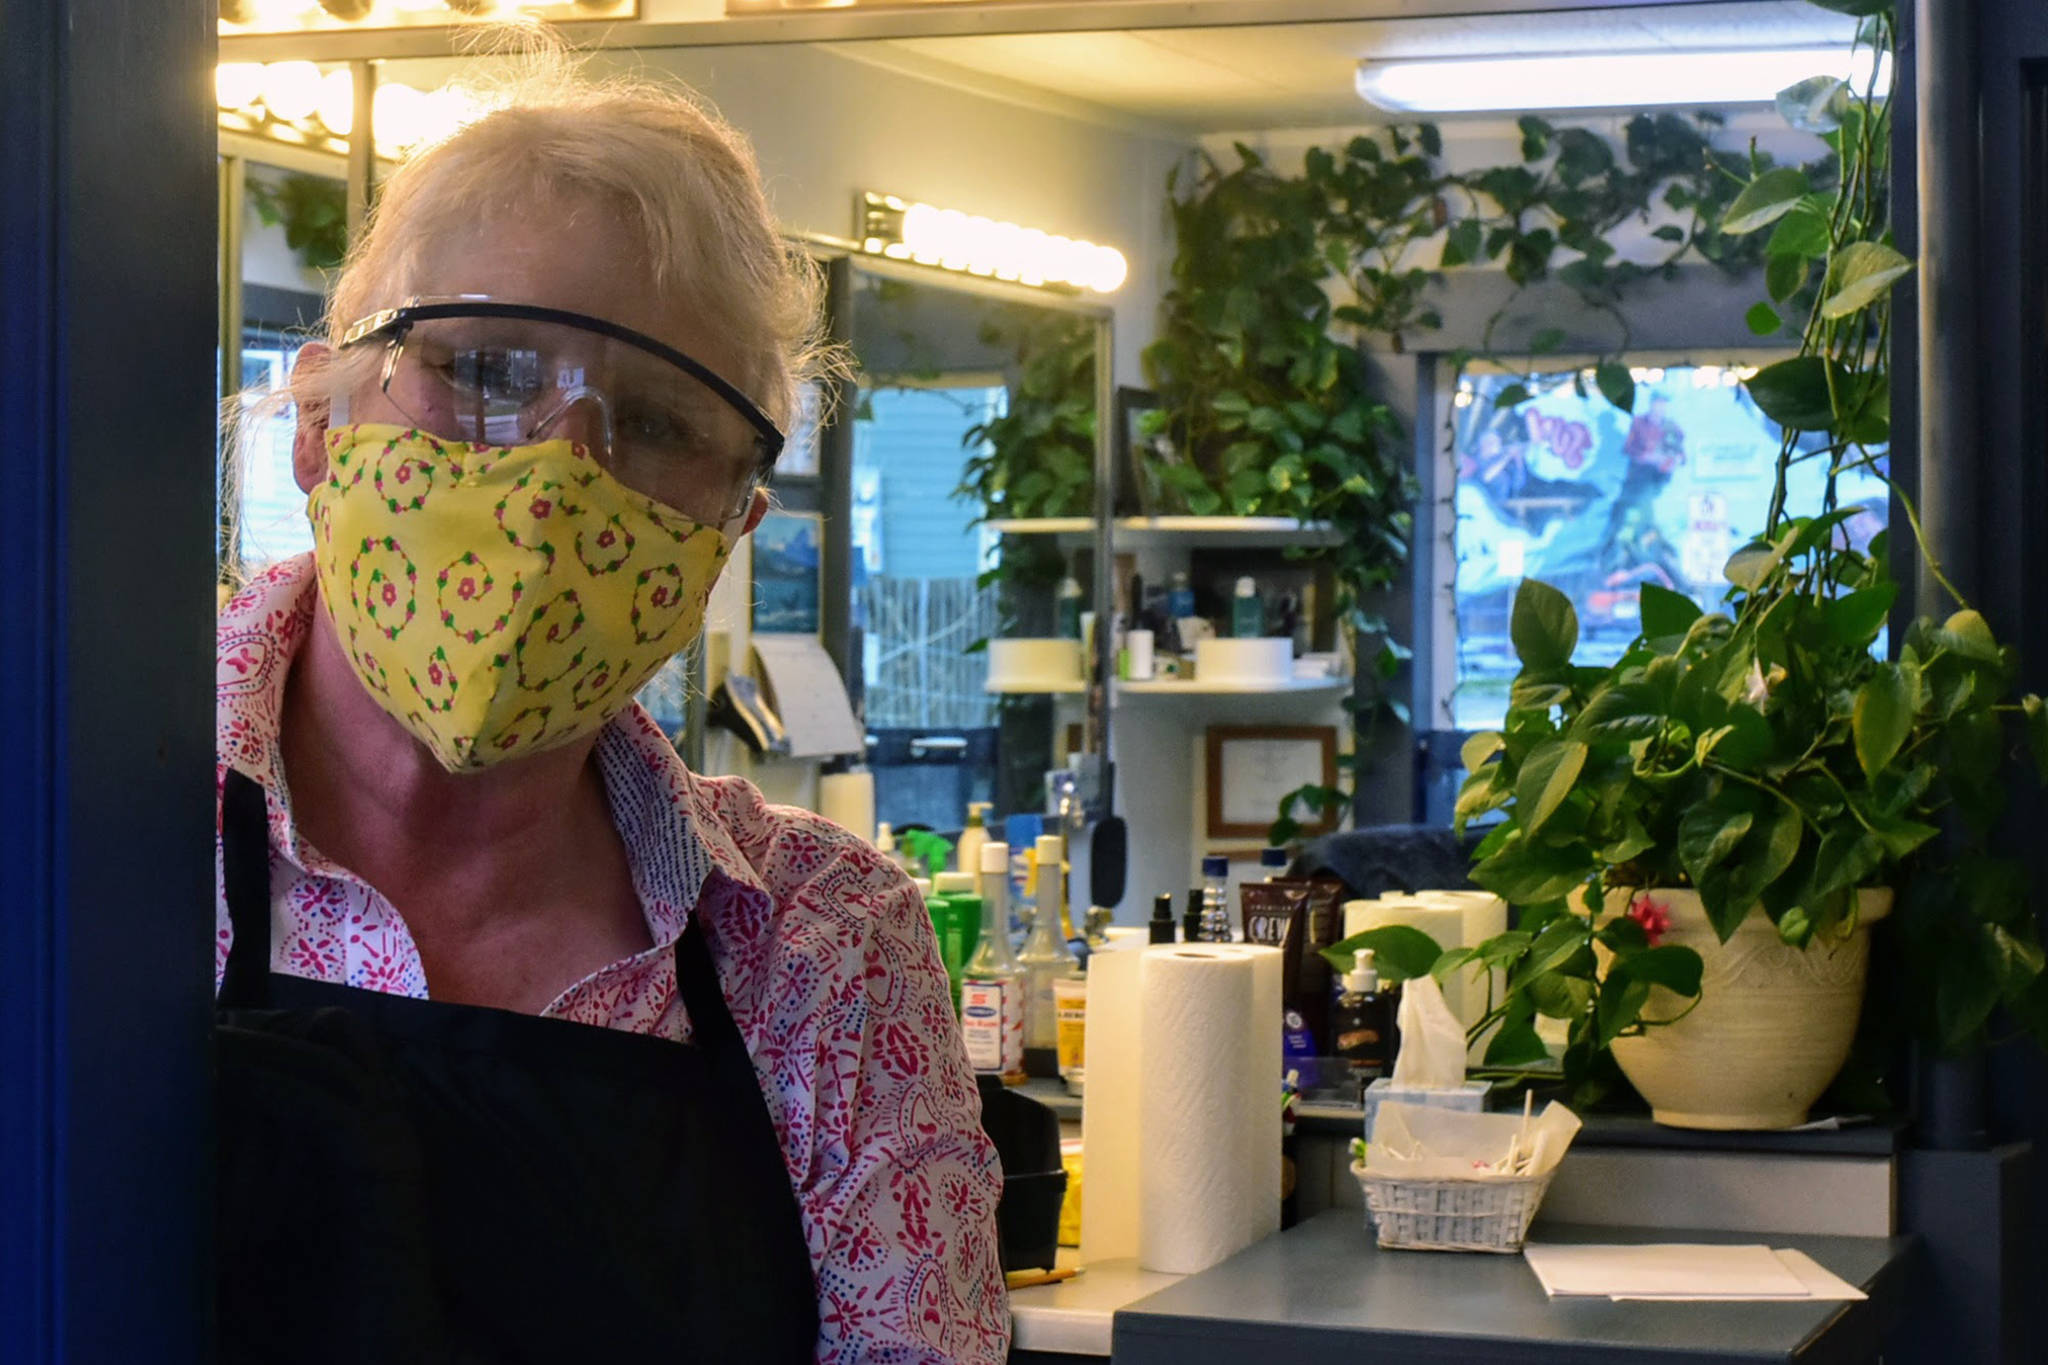 Mindy Roggenkamp, co-owner of Franklin Street Barbers, opened her doors Friday, April 24, 2020 even though she felt concerned it was happening so soon. She’s made her own facemasks, but still has trouble finding cleaning supplies and additional personal protective equipment such as gloves and plastic face shields. (Peter Segall | Juneau Empire)